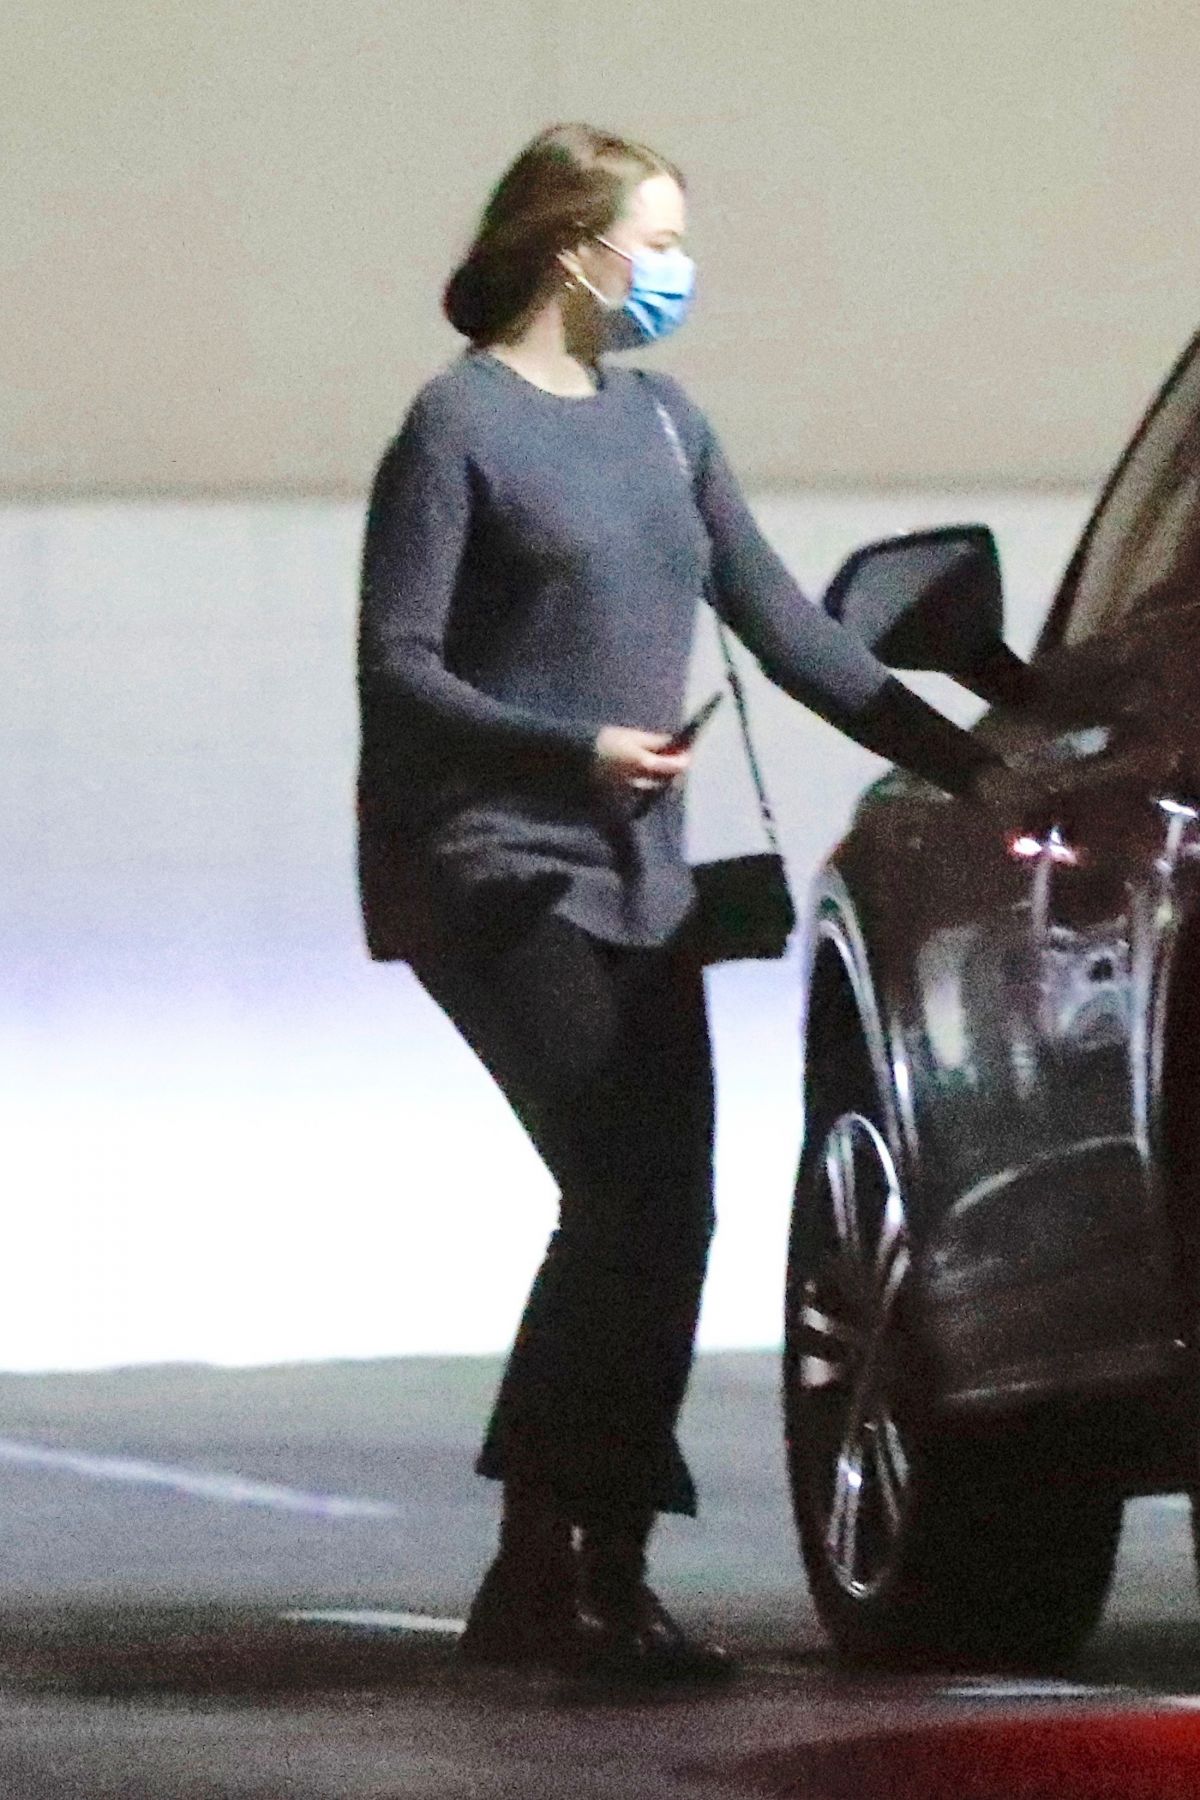 emma-stone-arrives-at-appintment-in-los-angeles-10-22-2020-0.jpg